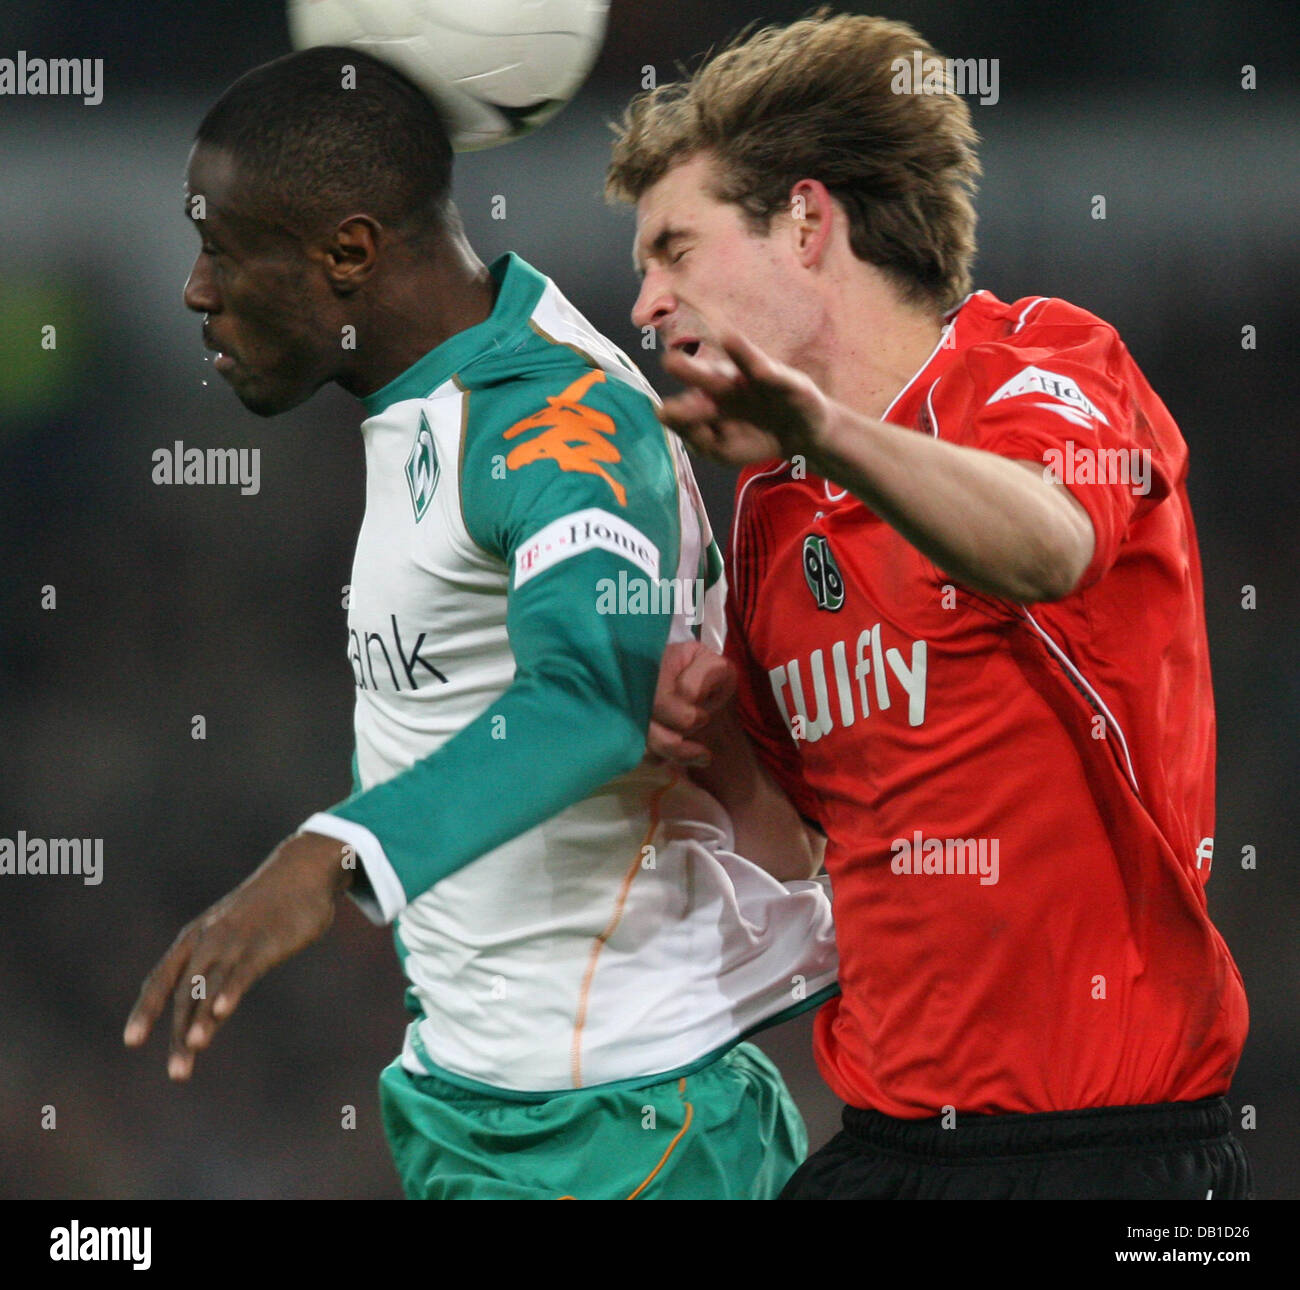 Thomas Kleine (R) of Hanover vies for the ball with Boubacar Sanogo of Bremen during the Bundesliga match Hanover 96 vs Werder Bremen at AWD-Arena stadium in Hanover, Germany, 08 December 2007. Hanover defeated Bremen 4-3. Photo: Friso Gentsch Stock Photo